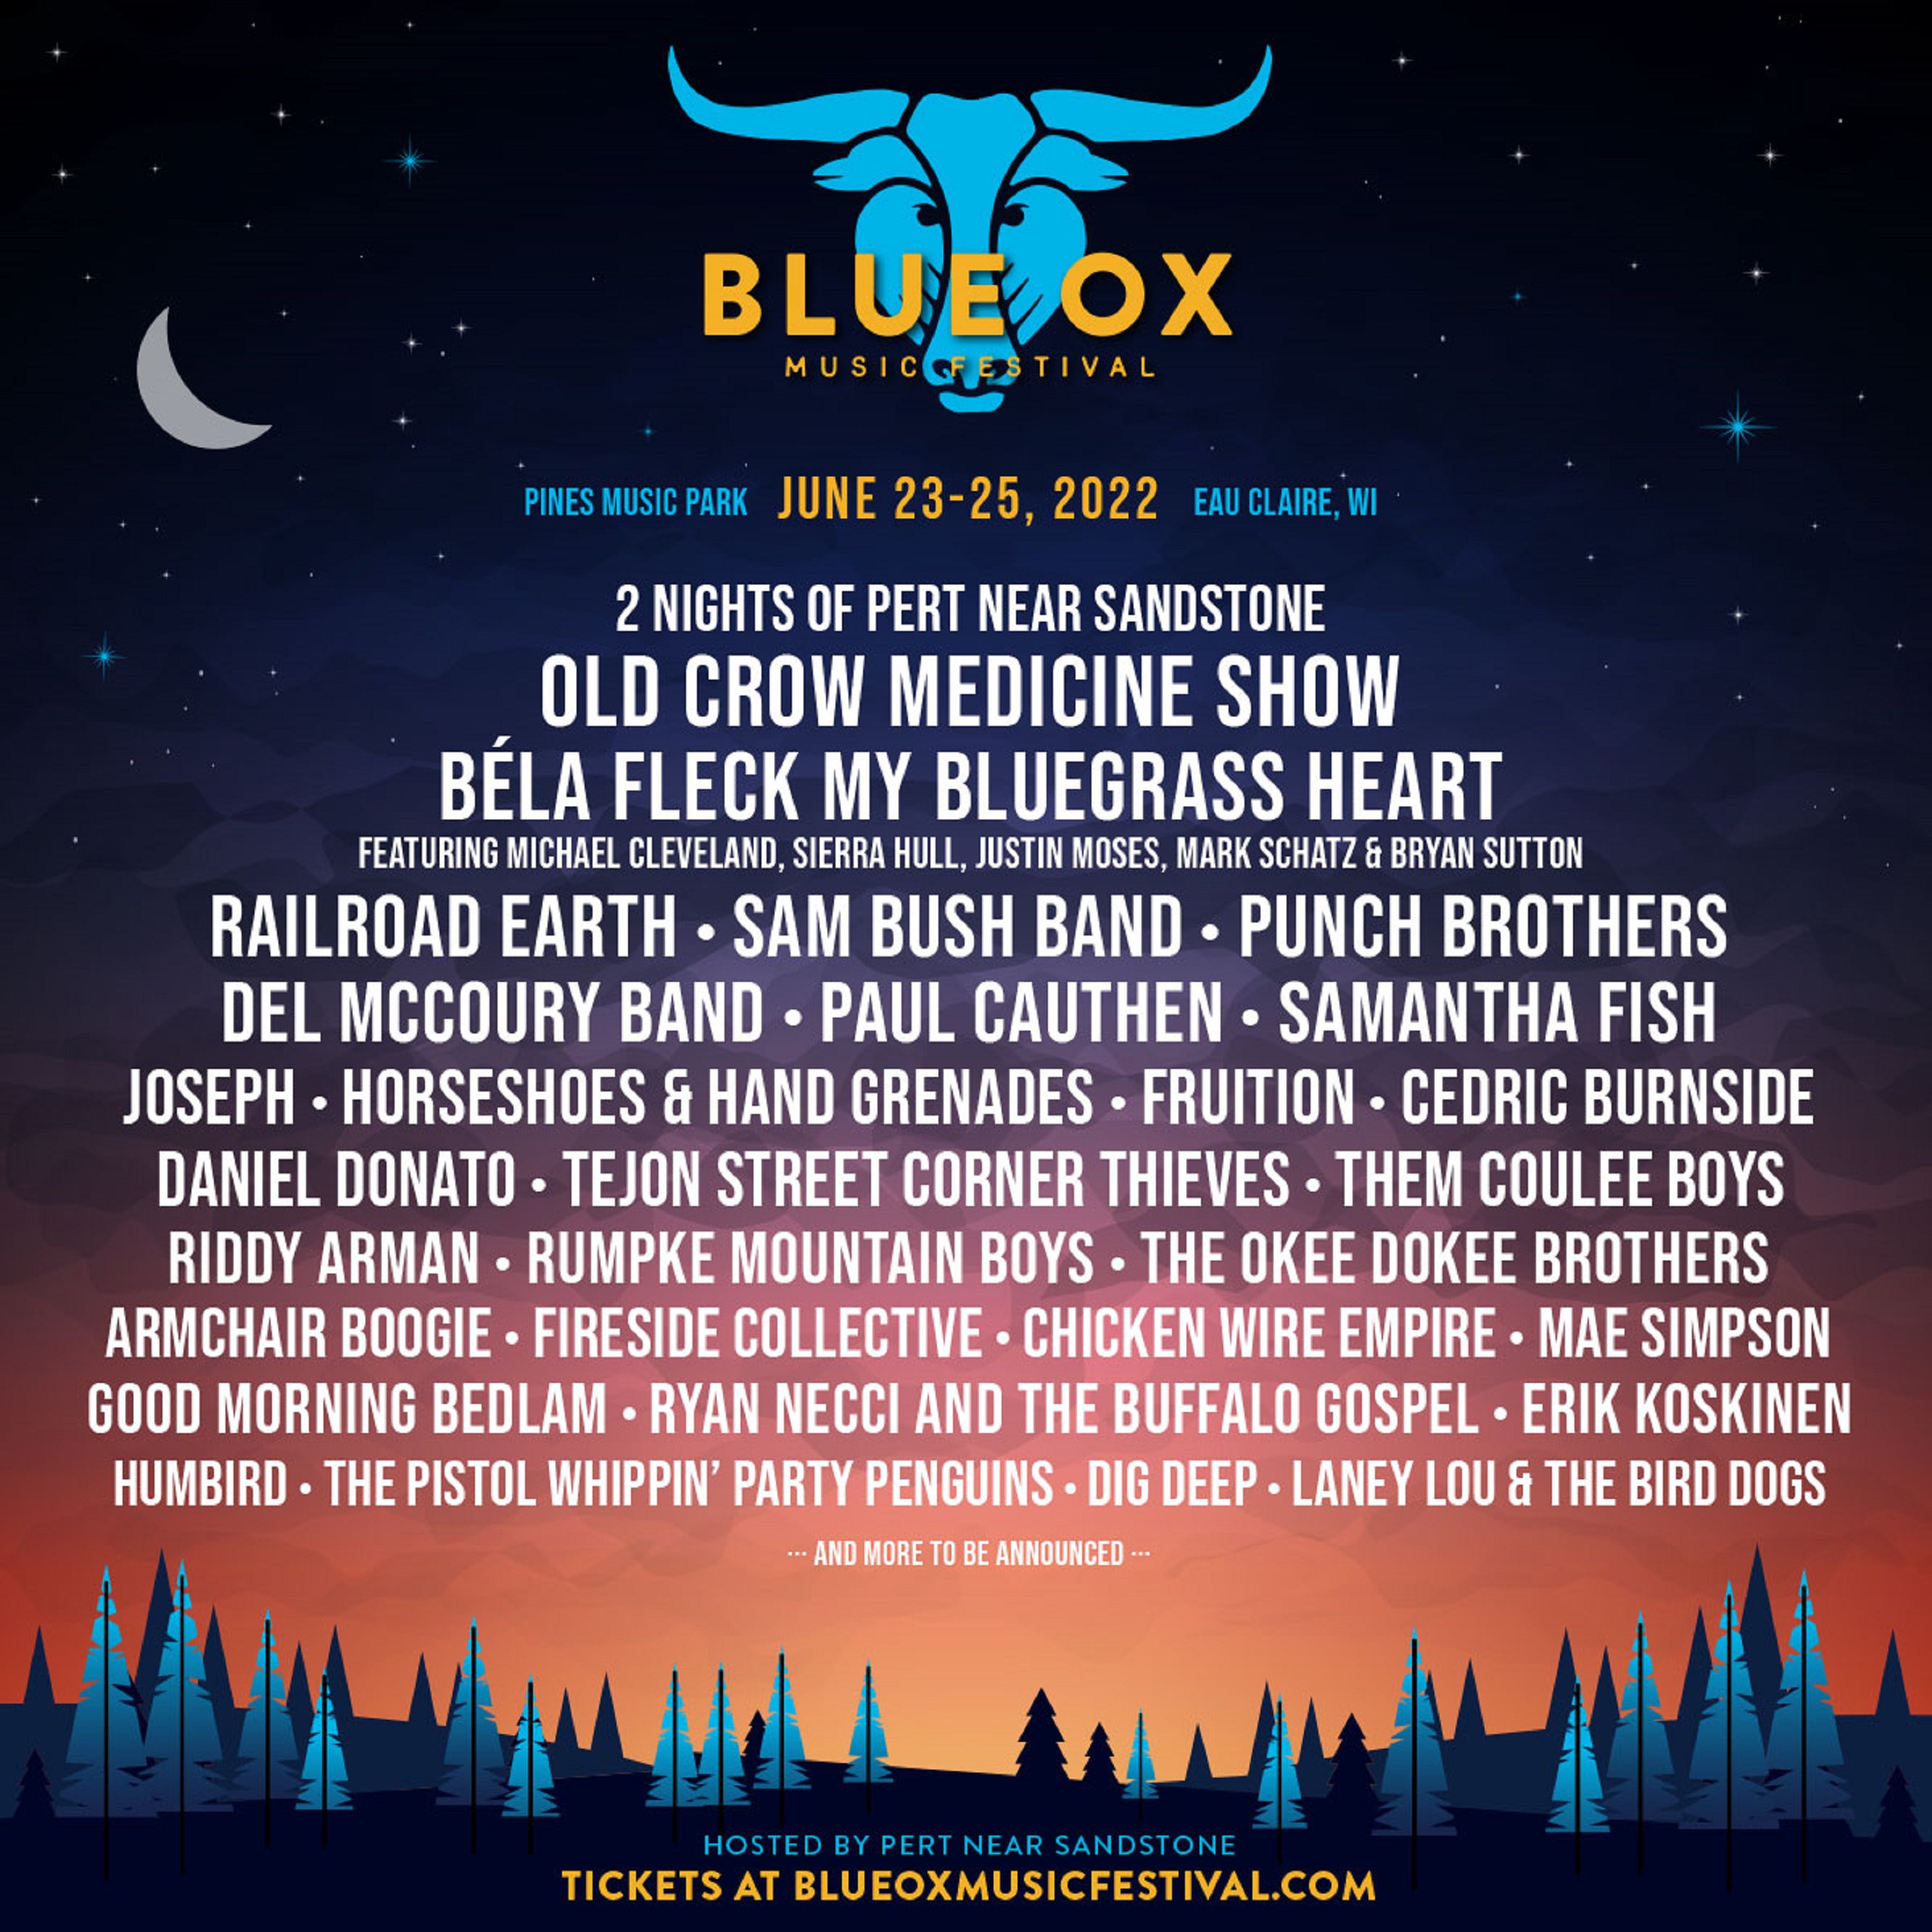 BLUE OX MUSIC FESTIVAL ANNOUNCES ITS INITIAL ARTIST LINEUP FOR 2022